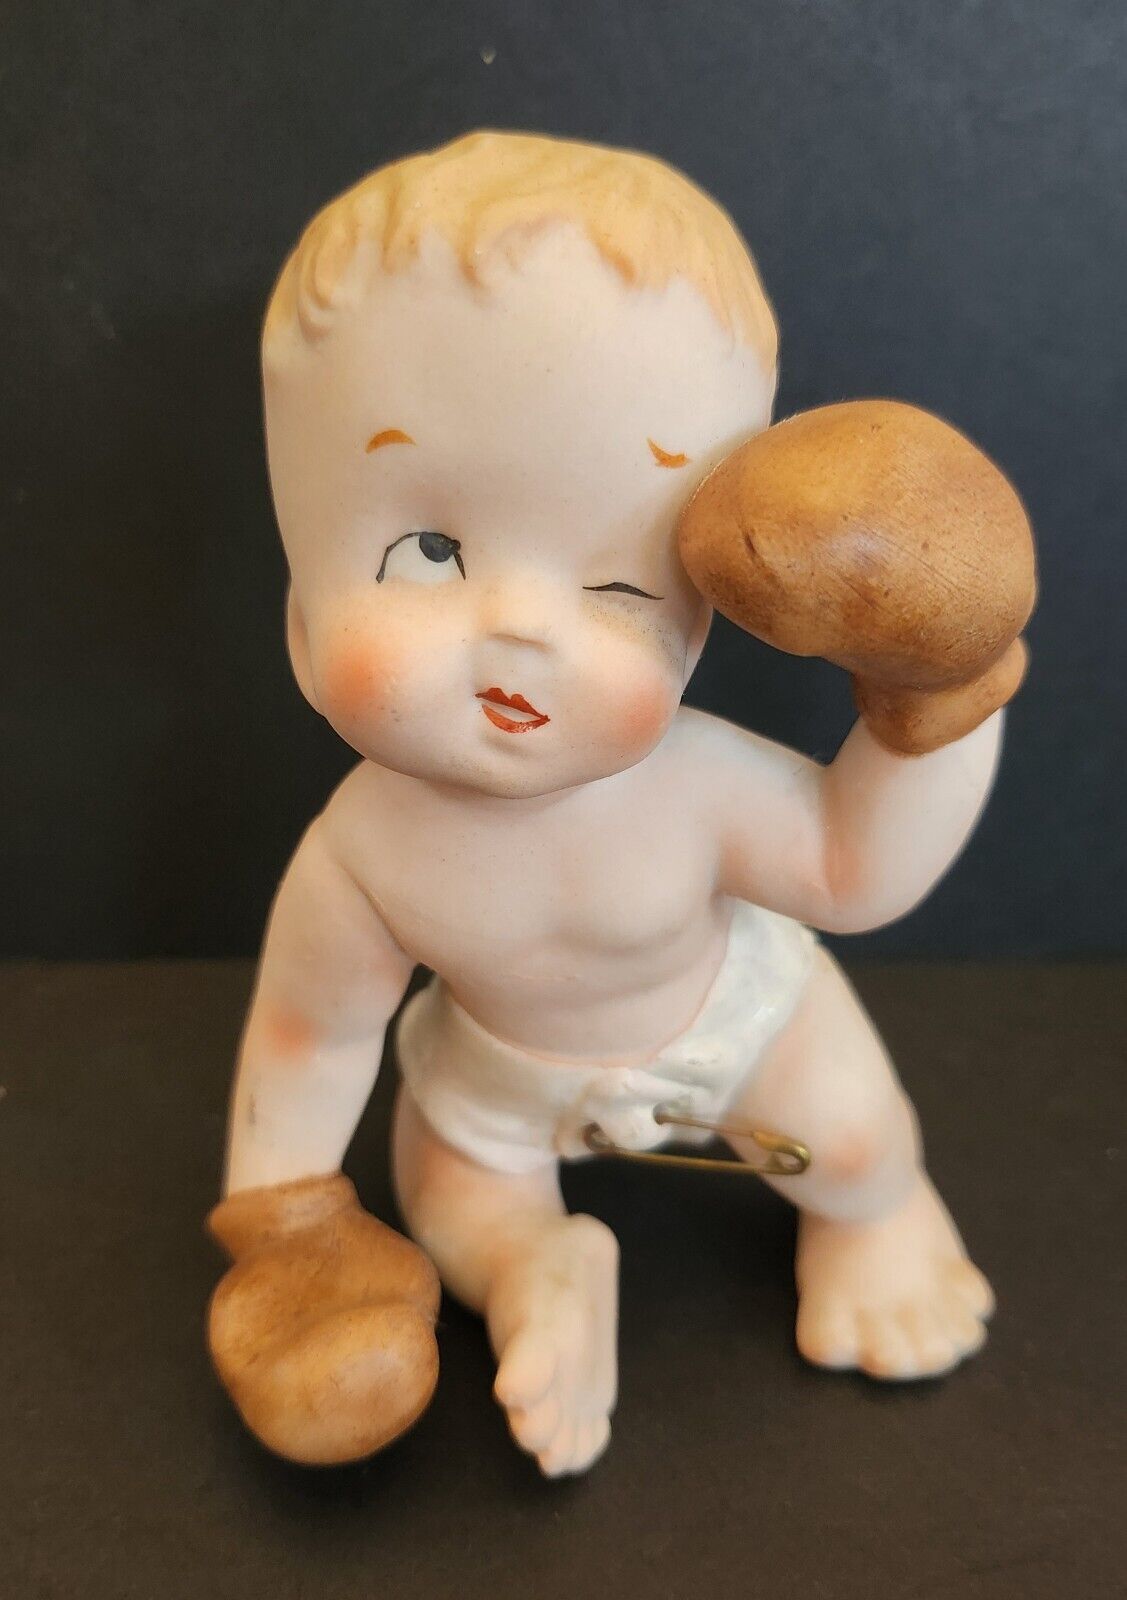 Vintage Ceramic Boxing Baby Toddler In Diaper, Knock Out Figurine 